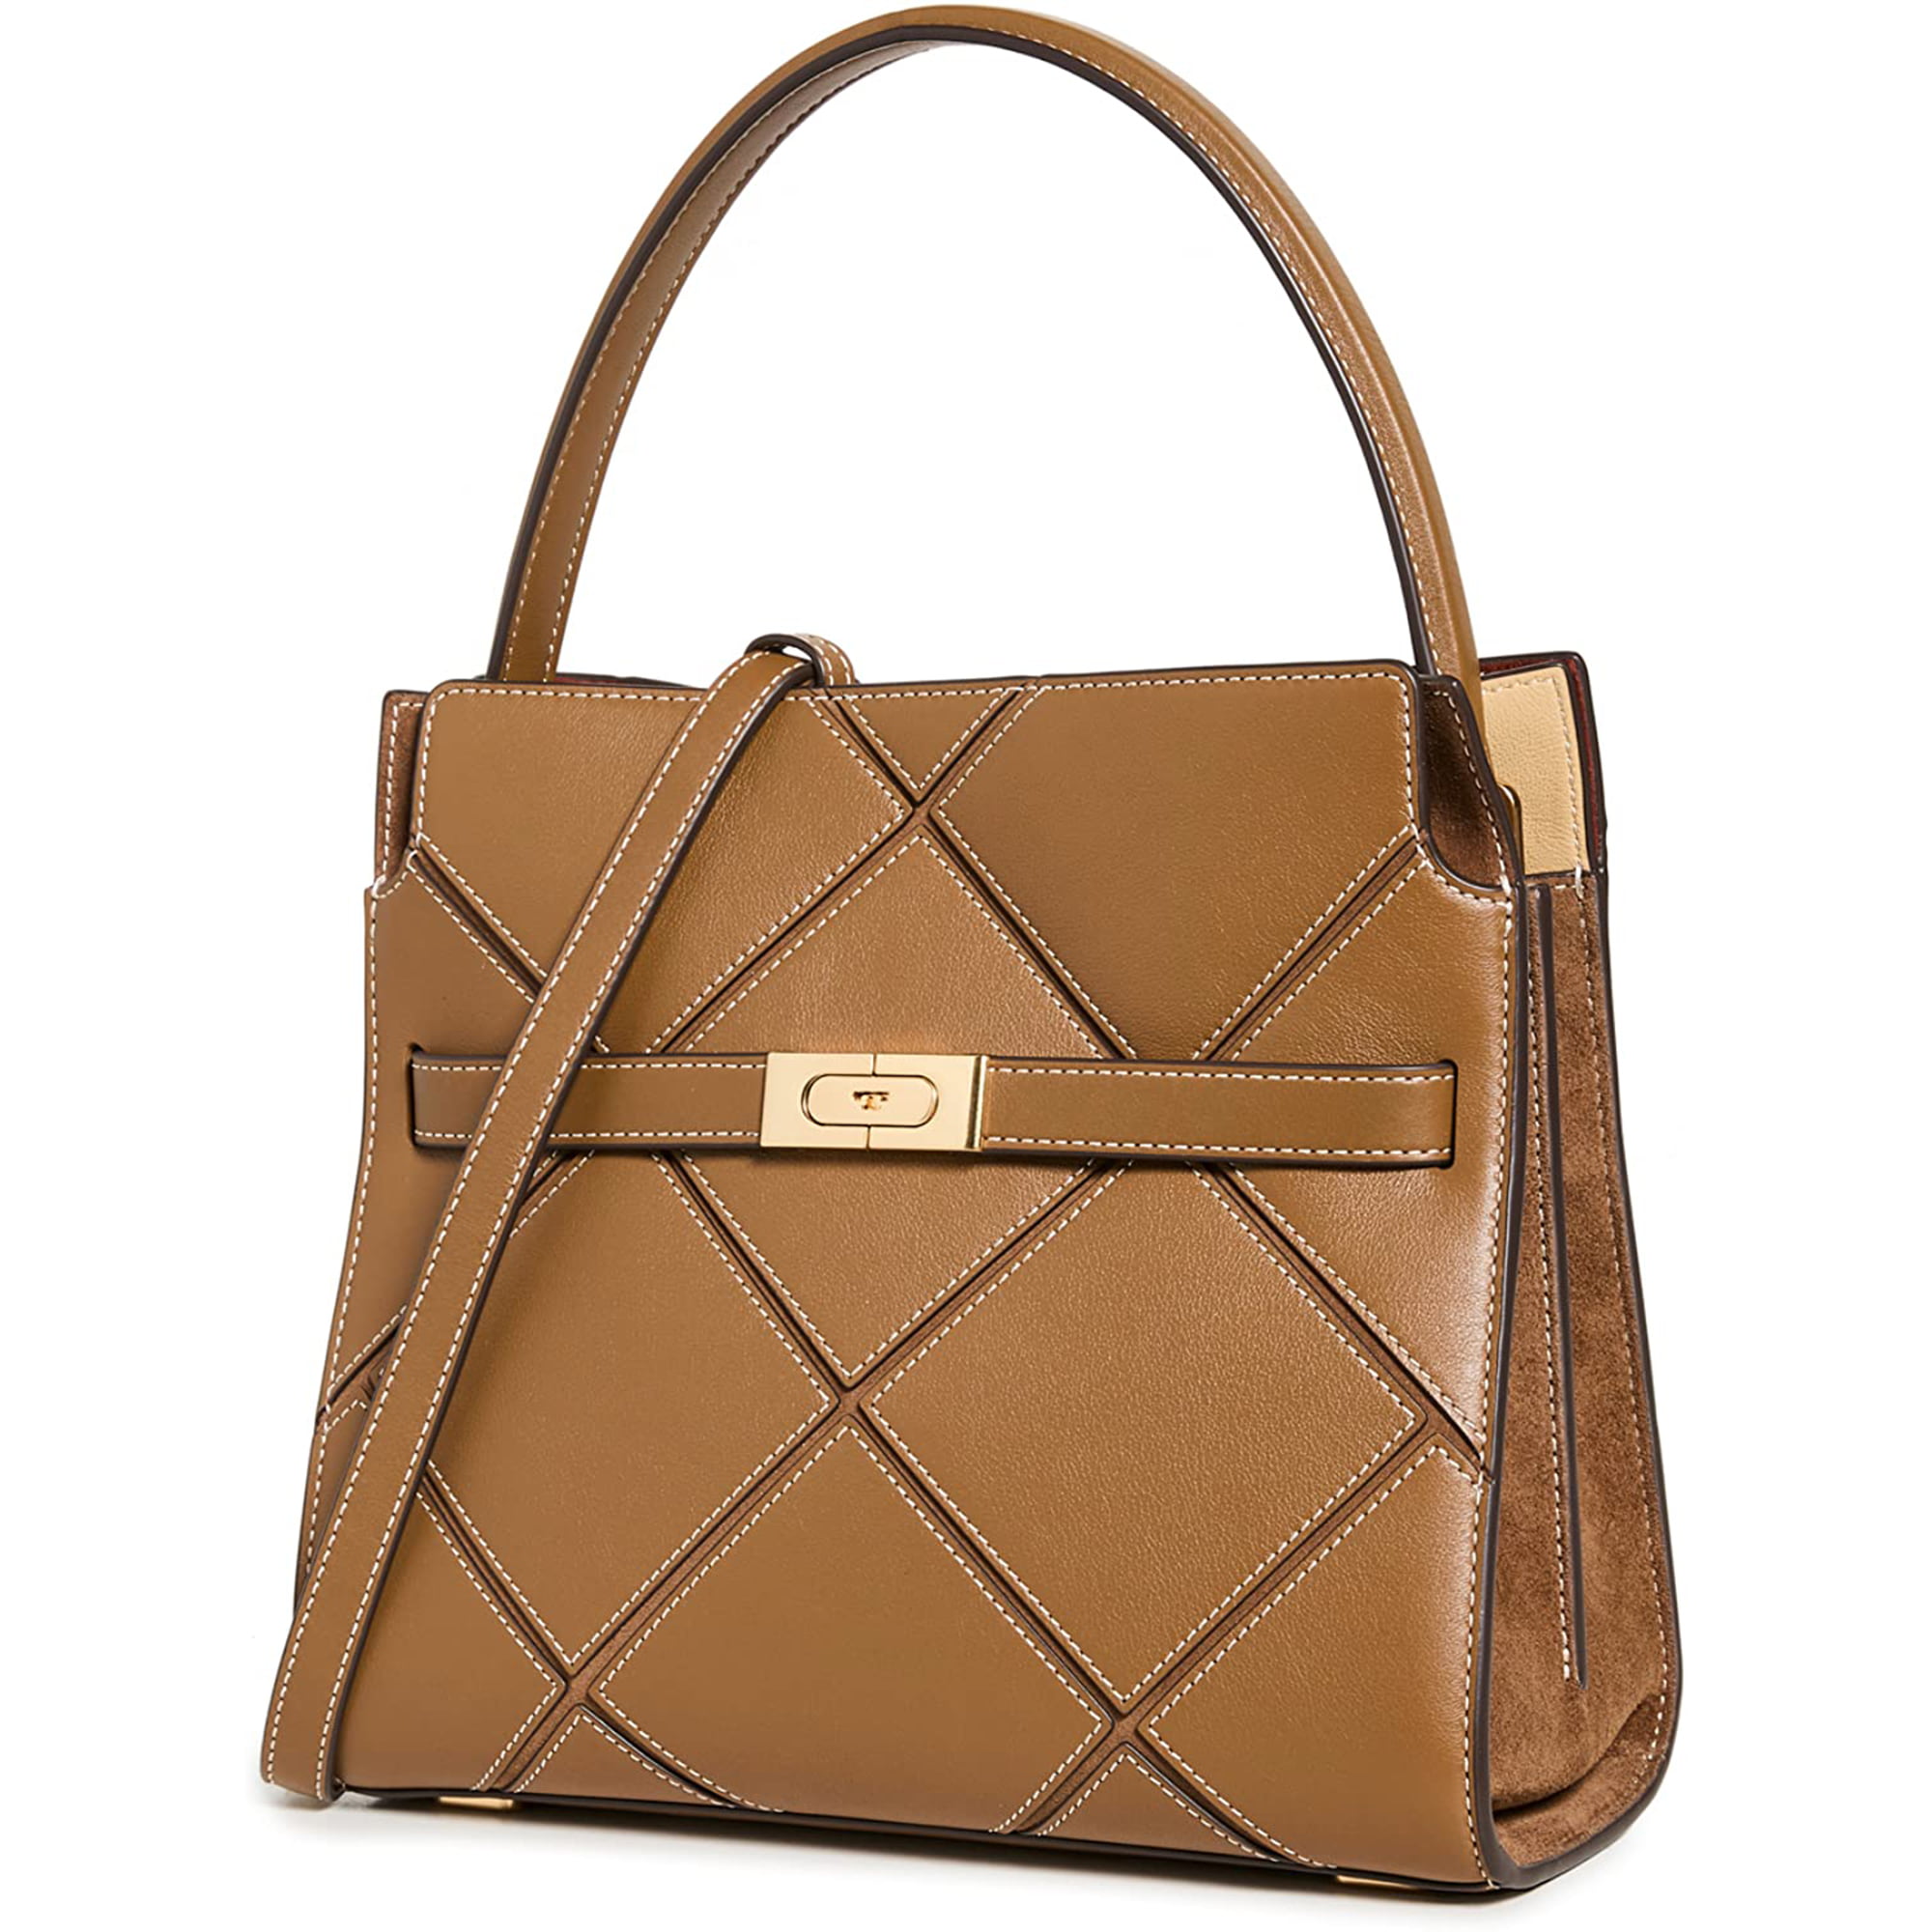 Tory Burch Women's Lee Radziwill Small Double Bag, Bistro Brown, One Size -  